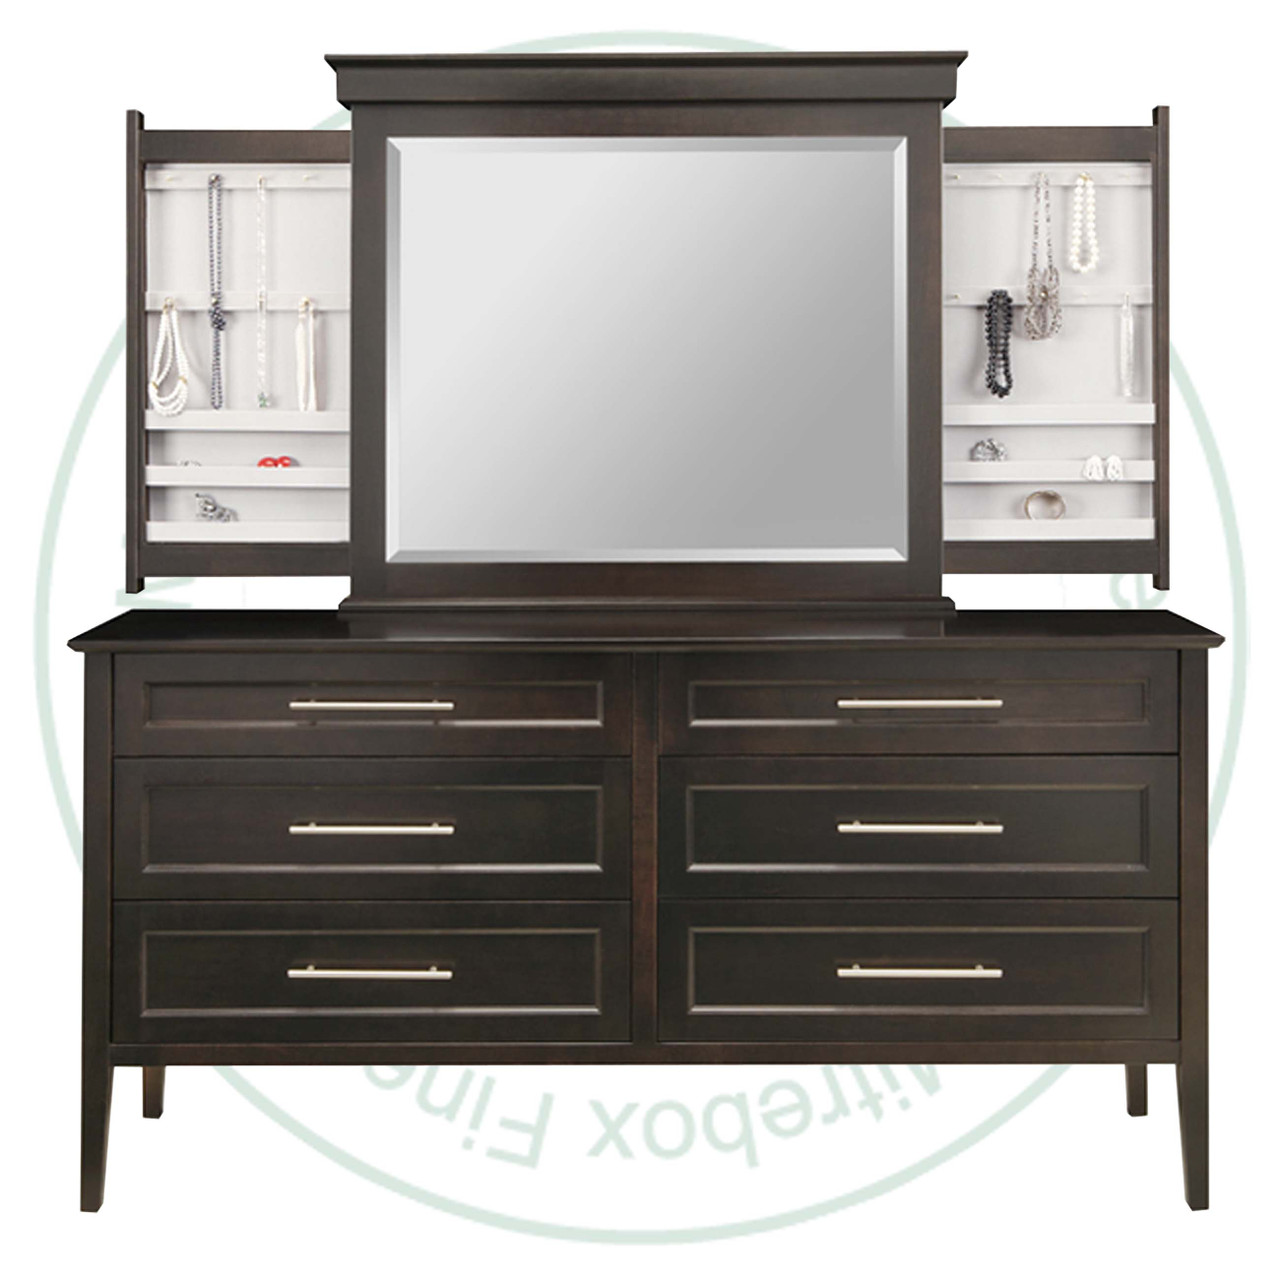 Oak Stockholm Double Dresser. 19''D x 70.5''W x 36''H With 6 Drawers